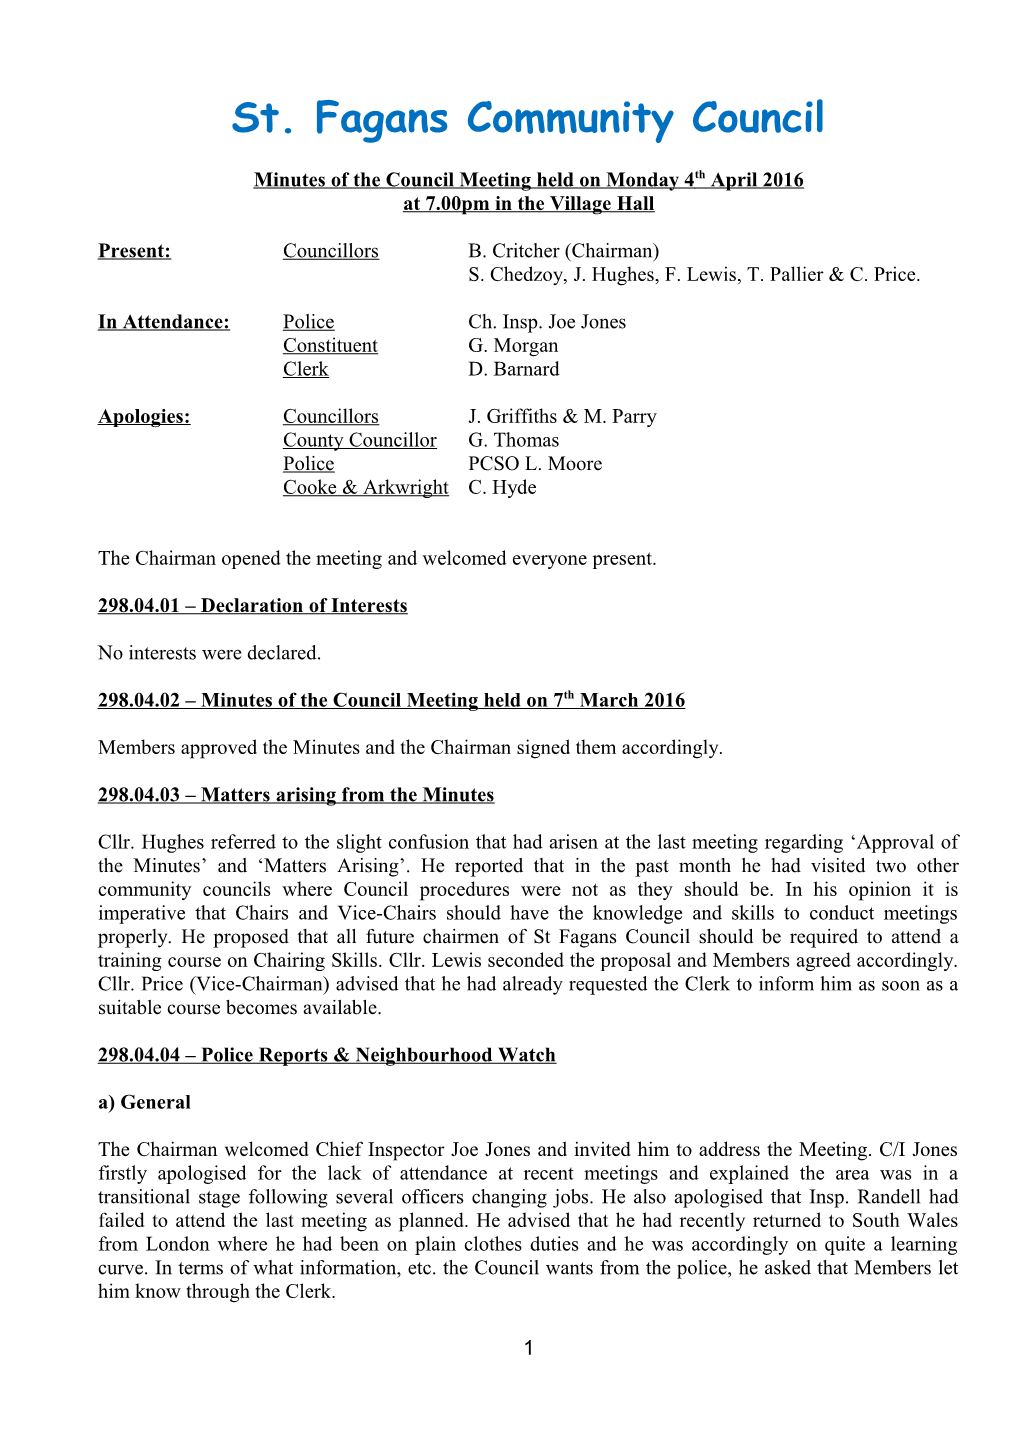 Minutes of the Council Meeting Held on Monday4thapril 2016